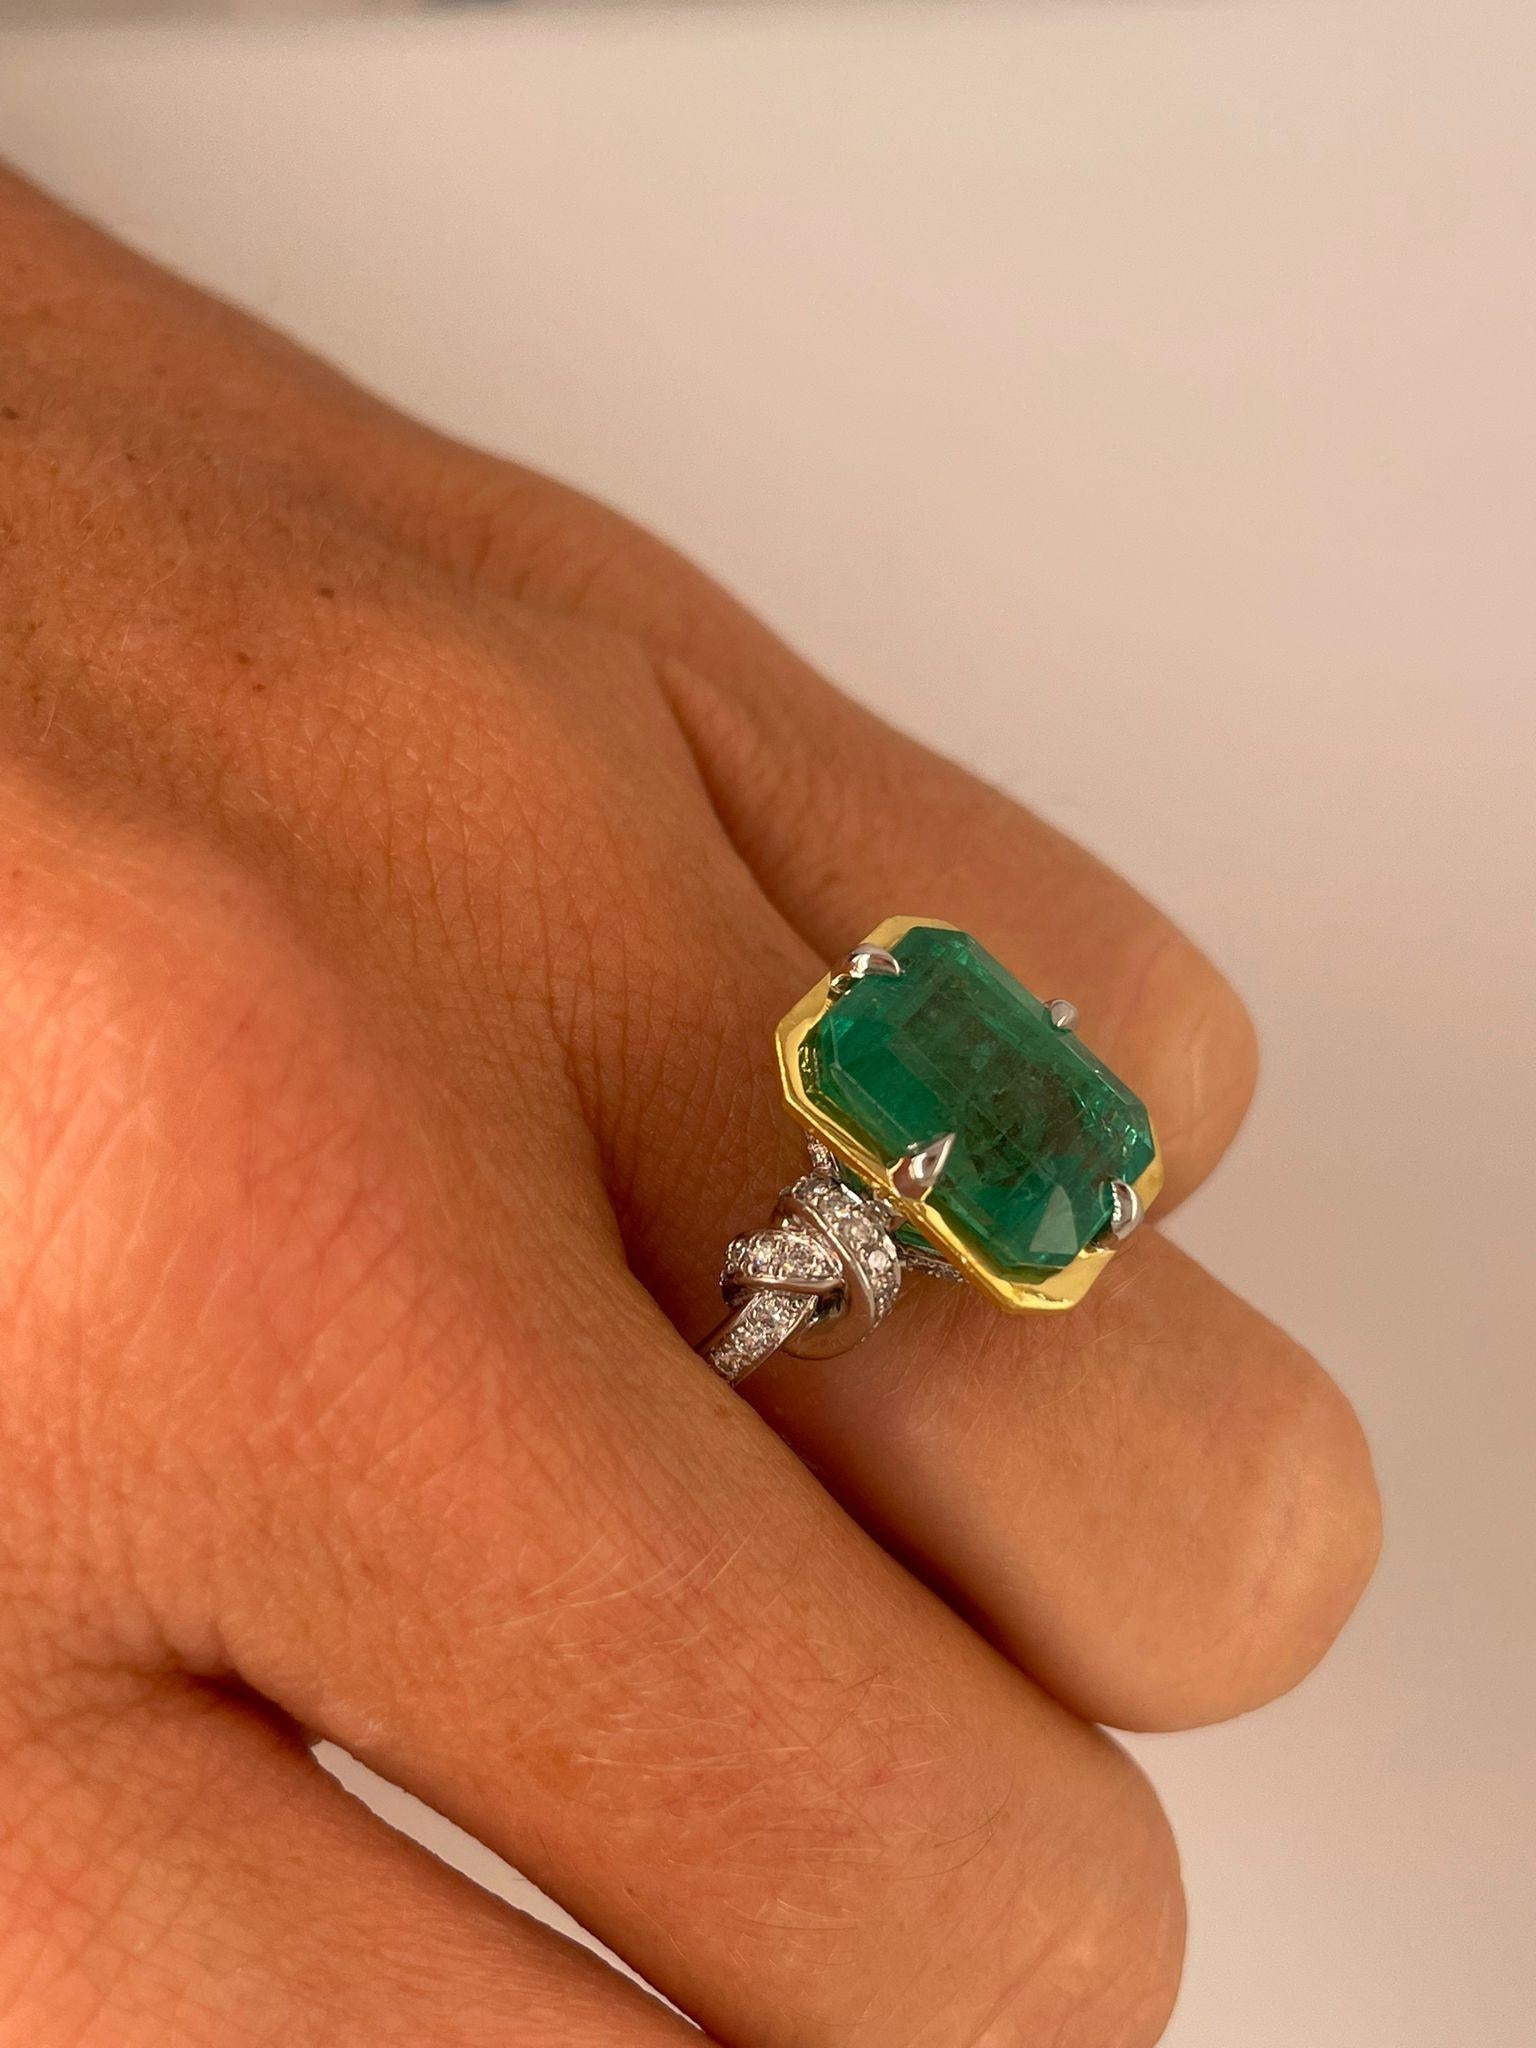 5.79 Carat Zambian Emerald in Forget Me Knot Style Ring with Diamonds 7